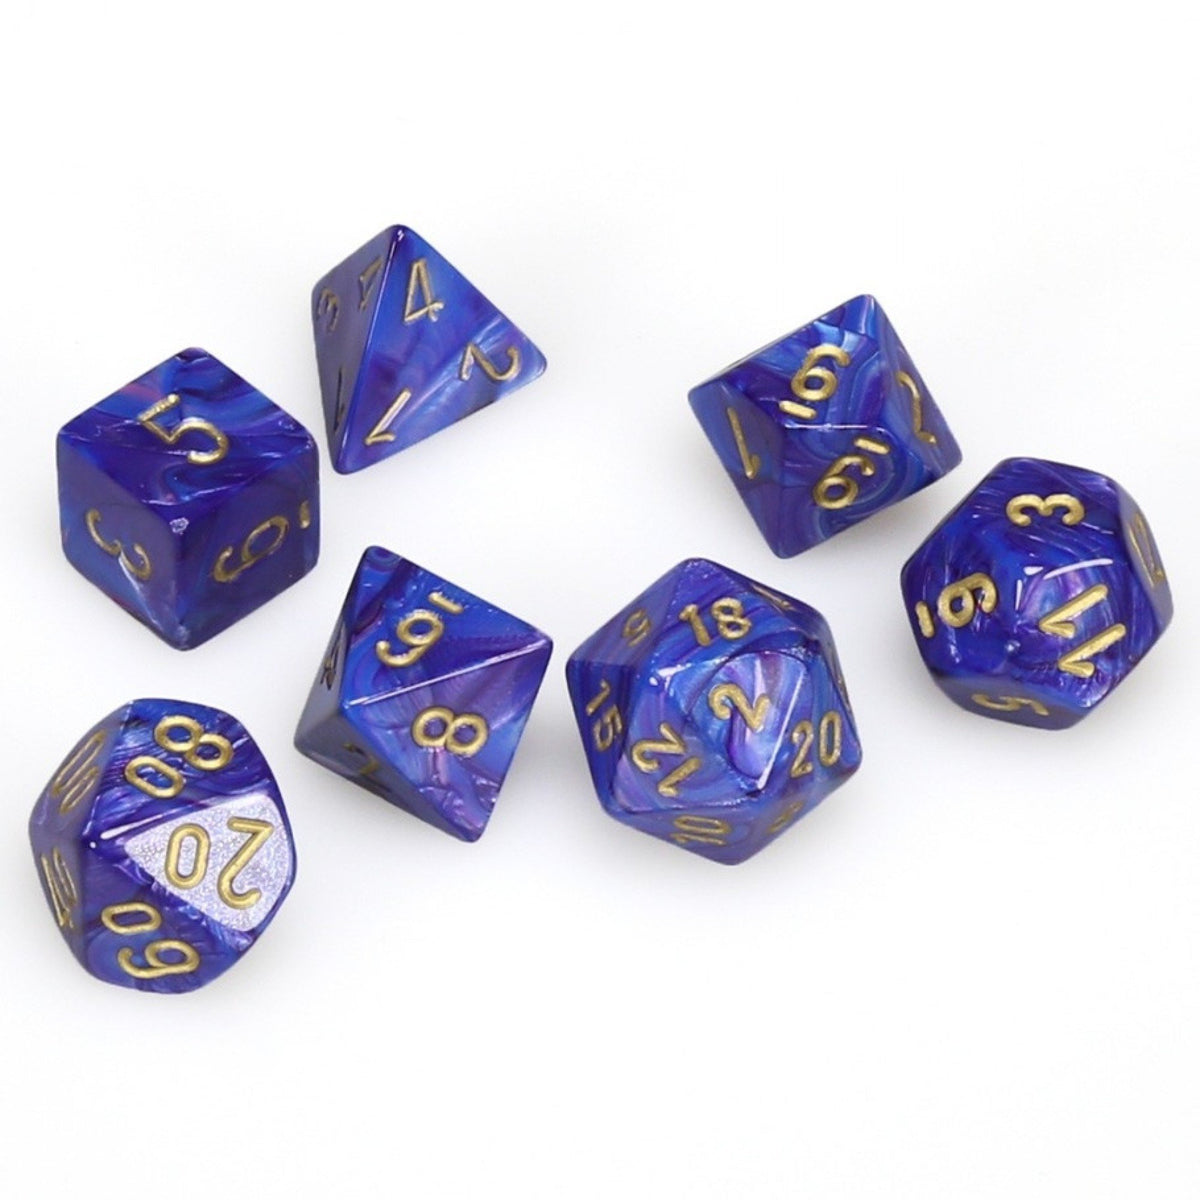 Chessex Lustrous™ Polyhedral 7pcs Dice (Purple/Gold) [CHX27497]-Chessex-Ace Cards &amp; Collectibles